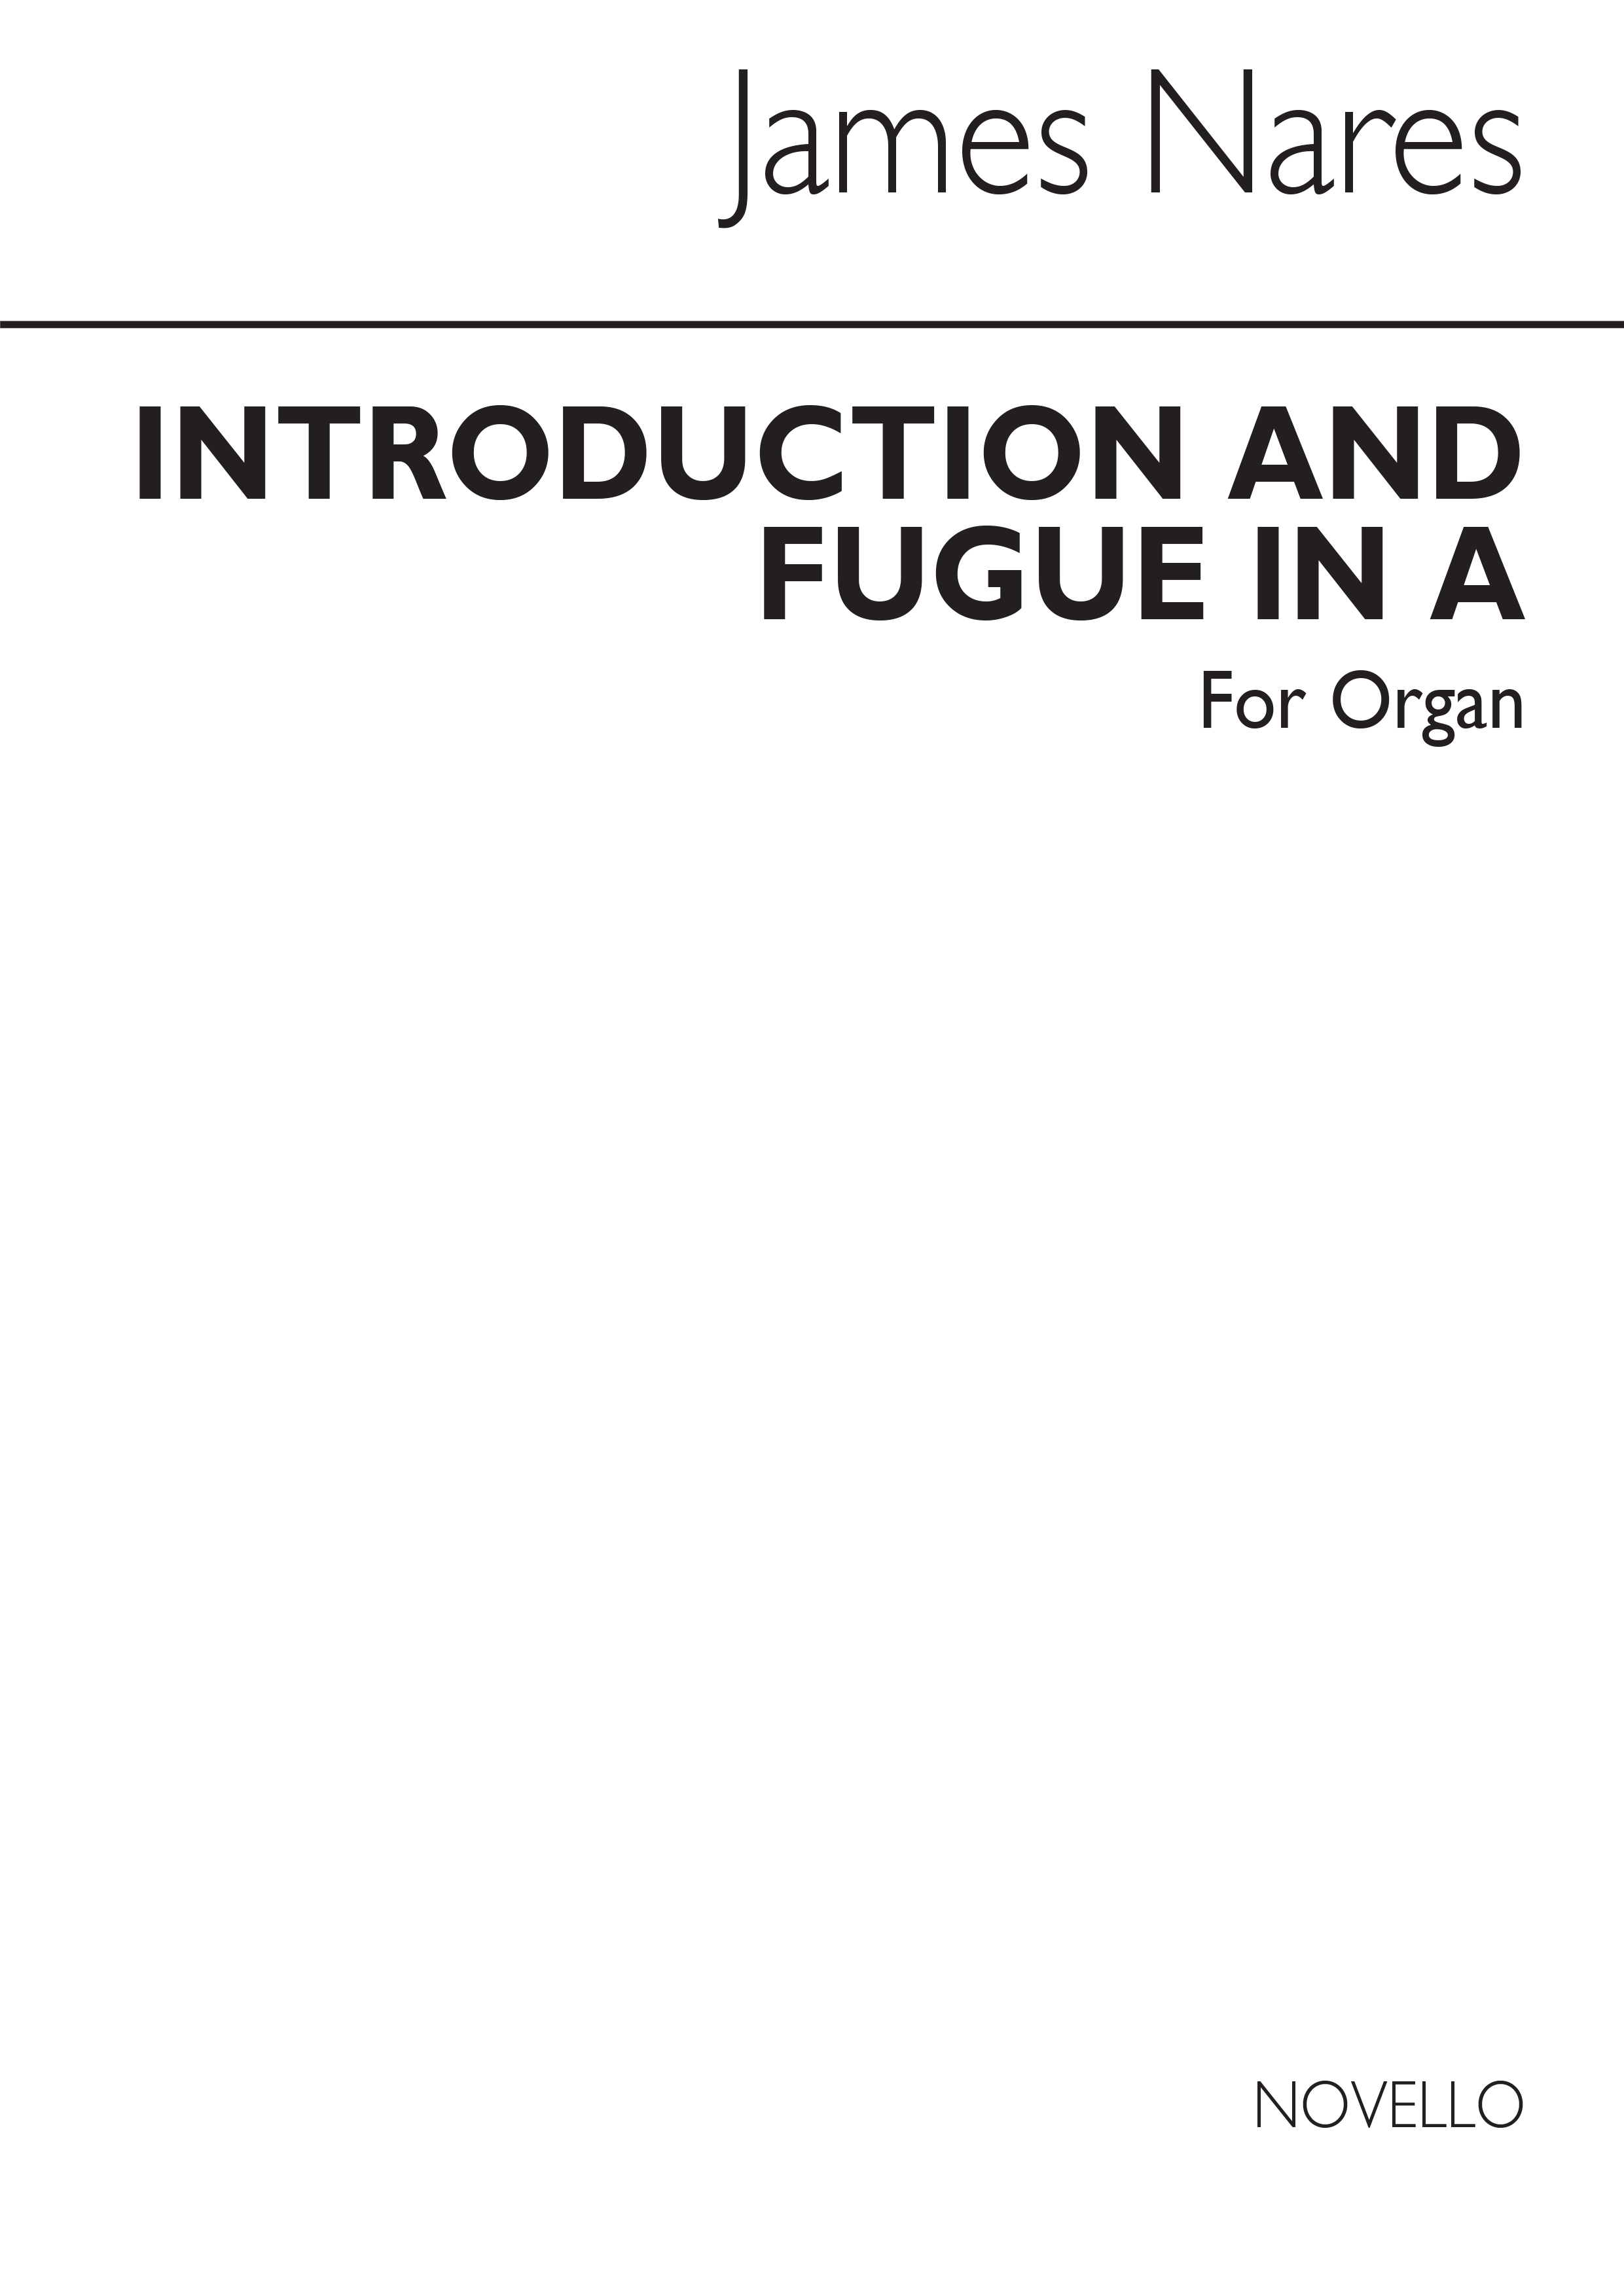 James Nares: Introduction And Fugue In A For Organ